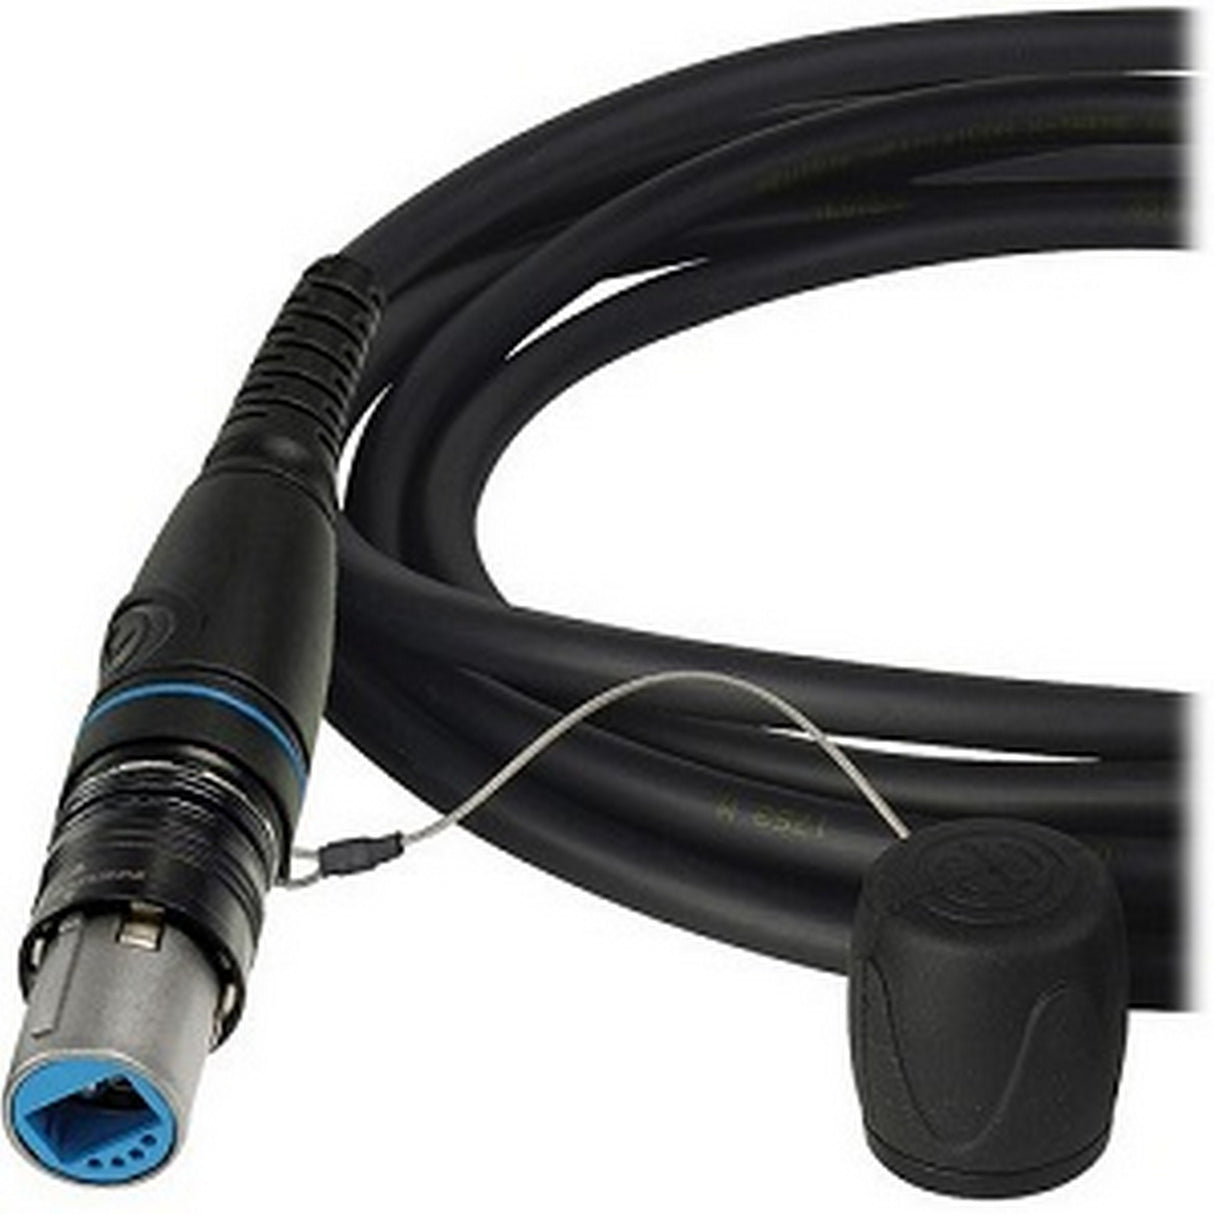 JVC VCFSH025NMC SMPTE Hybrid Fiber Cable with opticalCON Connectors, 25-Meters